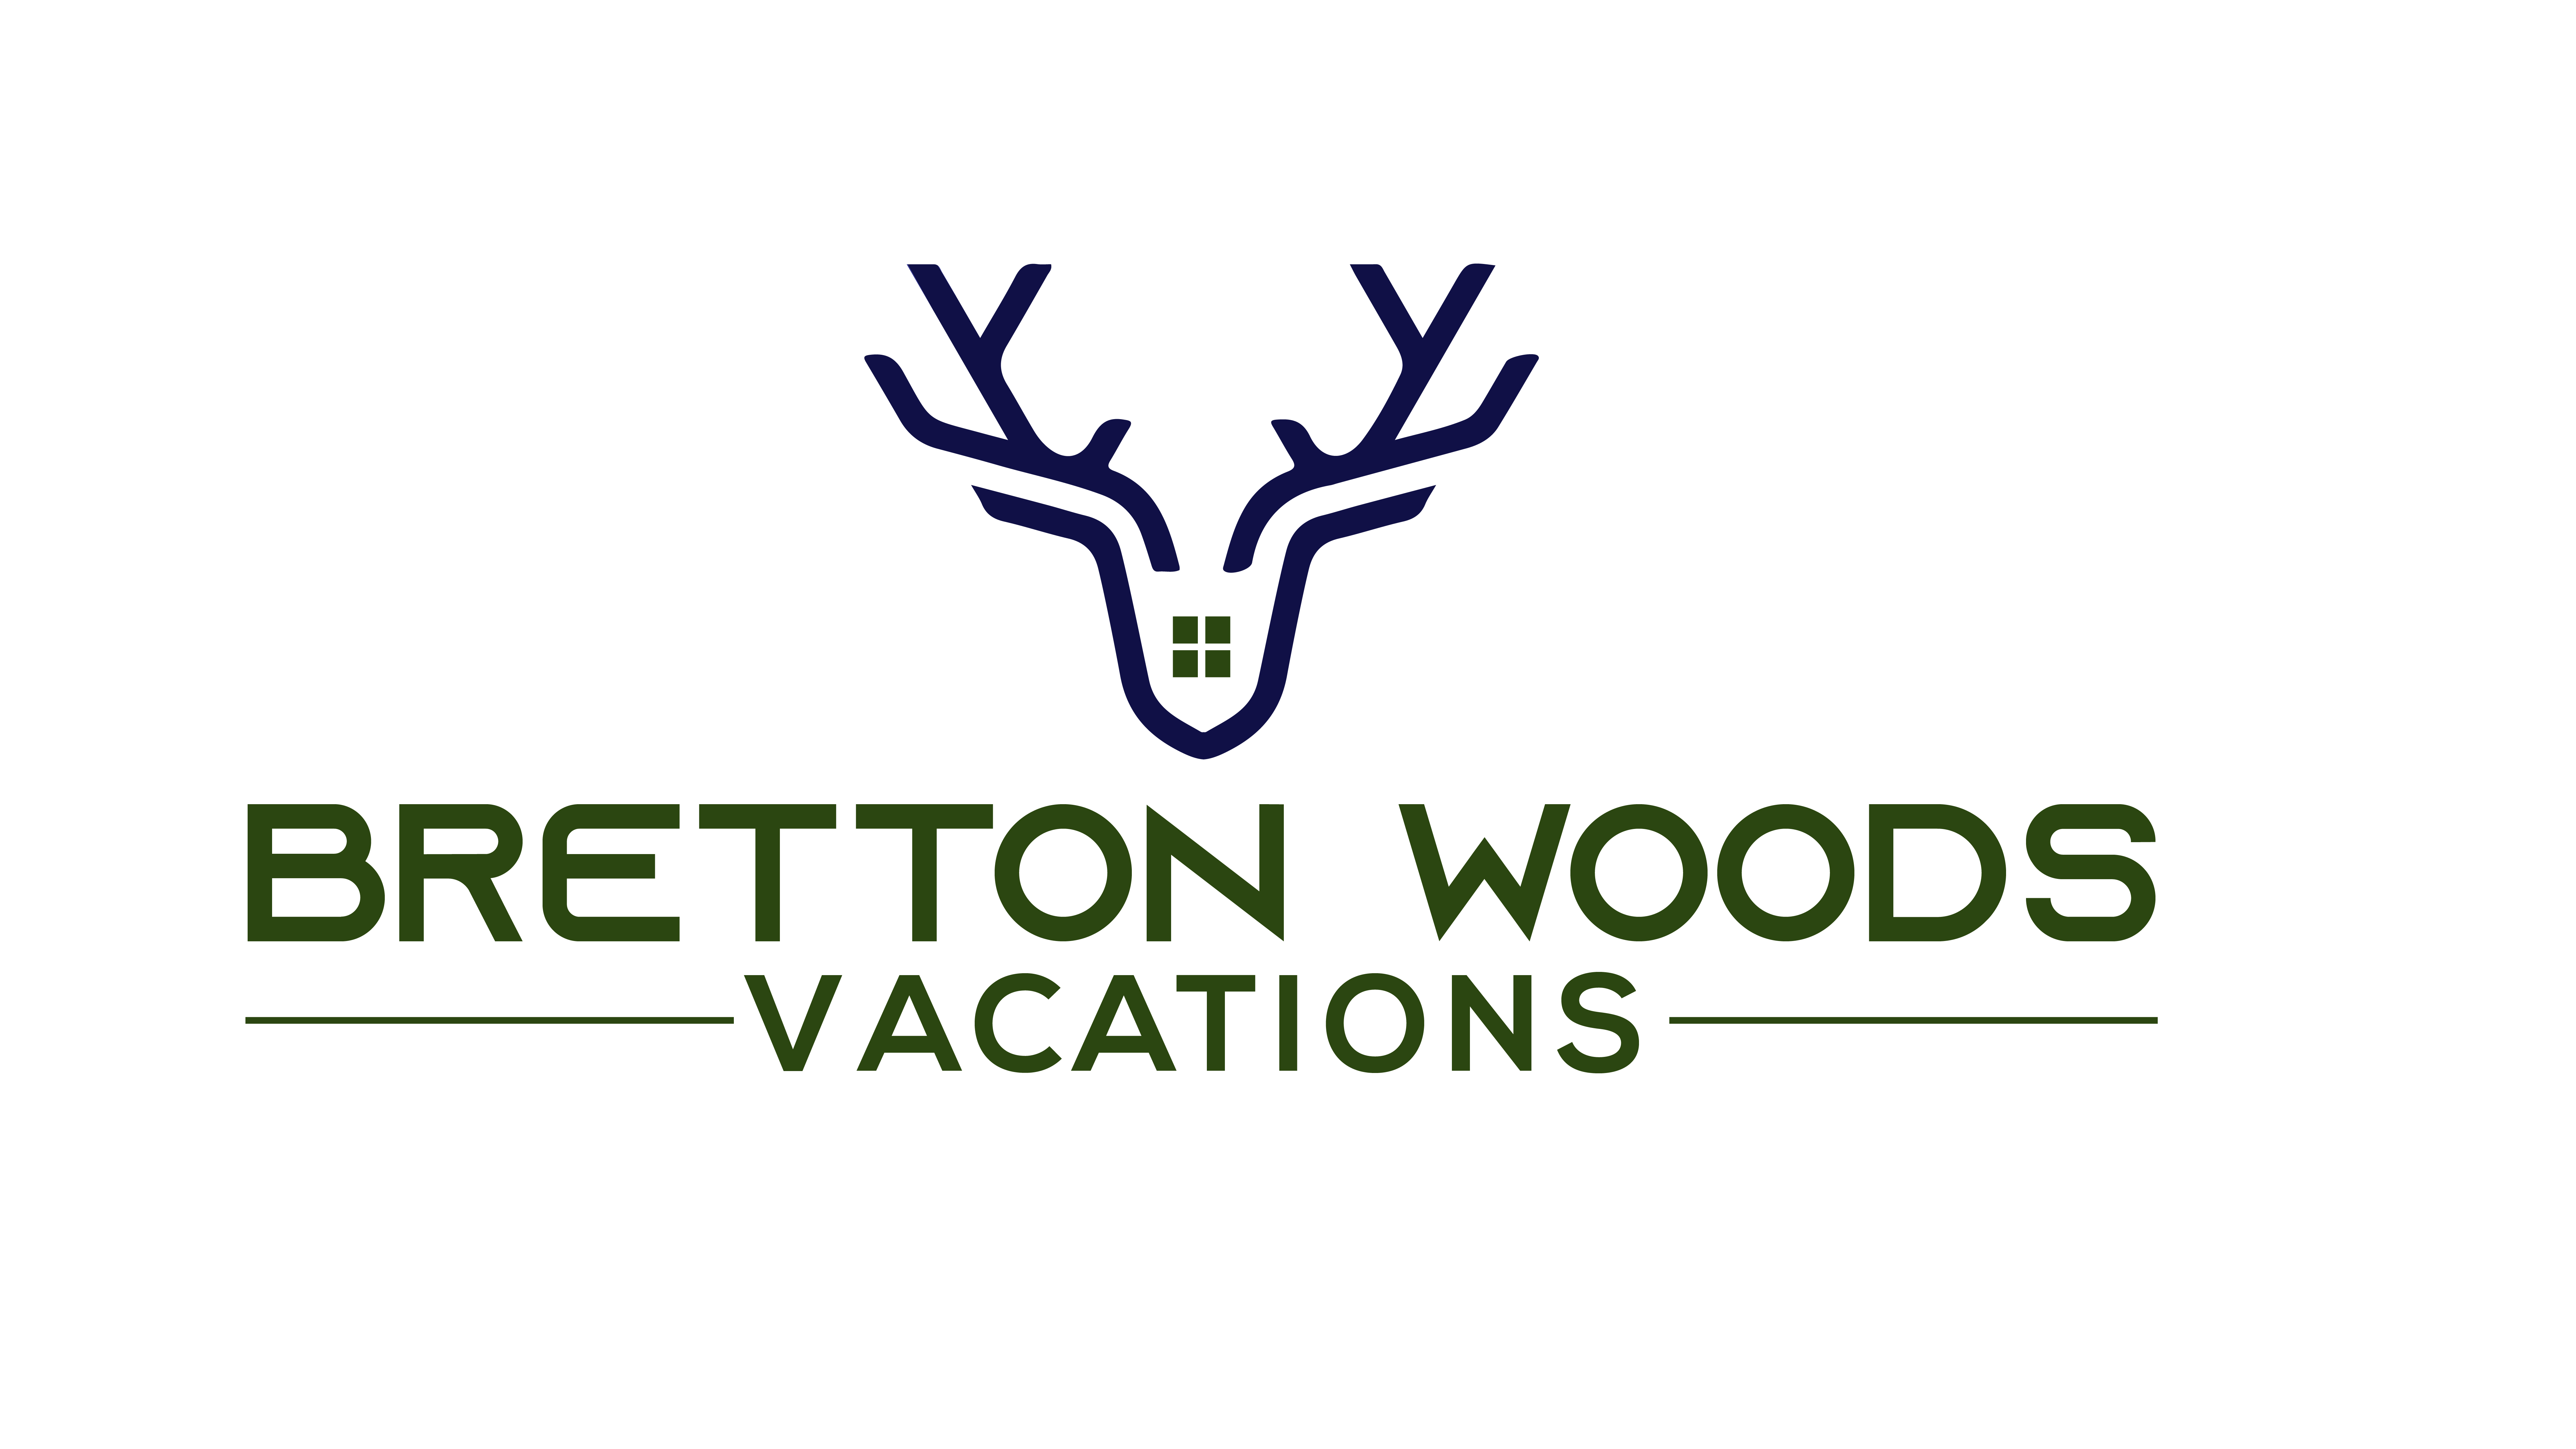 Bretton Woods Vacations - The Premier White Mountain New Hampshire Vacation Rental Service!